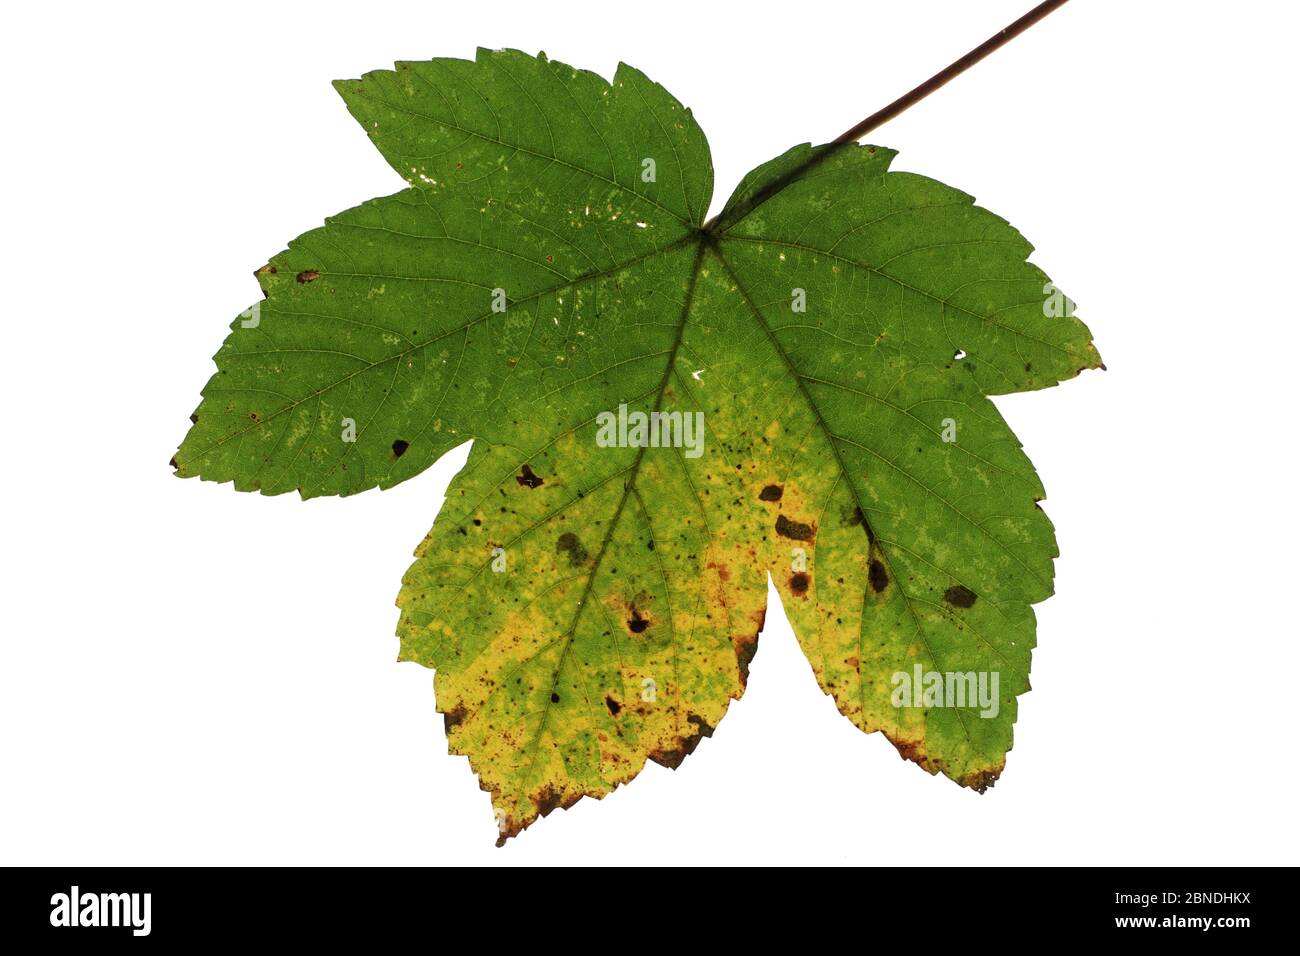 Sycamore (Acer pseudoplatanus) cut out on white background, showing Tar-spot fungus (Rhytisma acerinum). Stock Photo